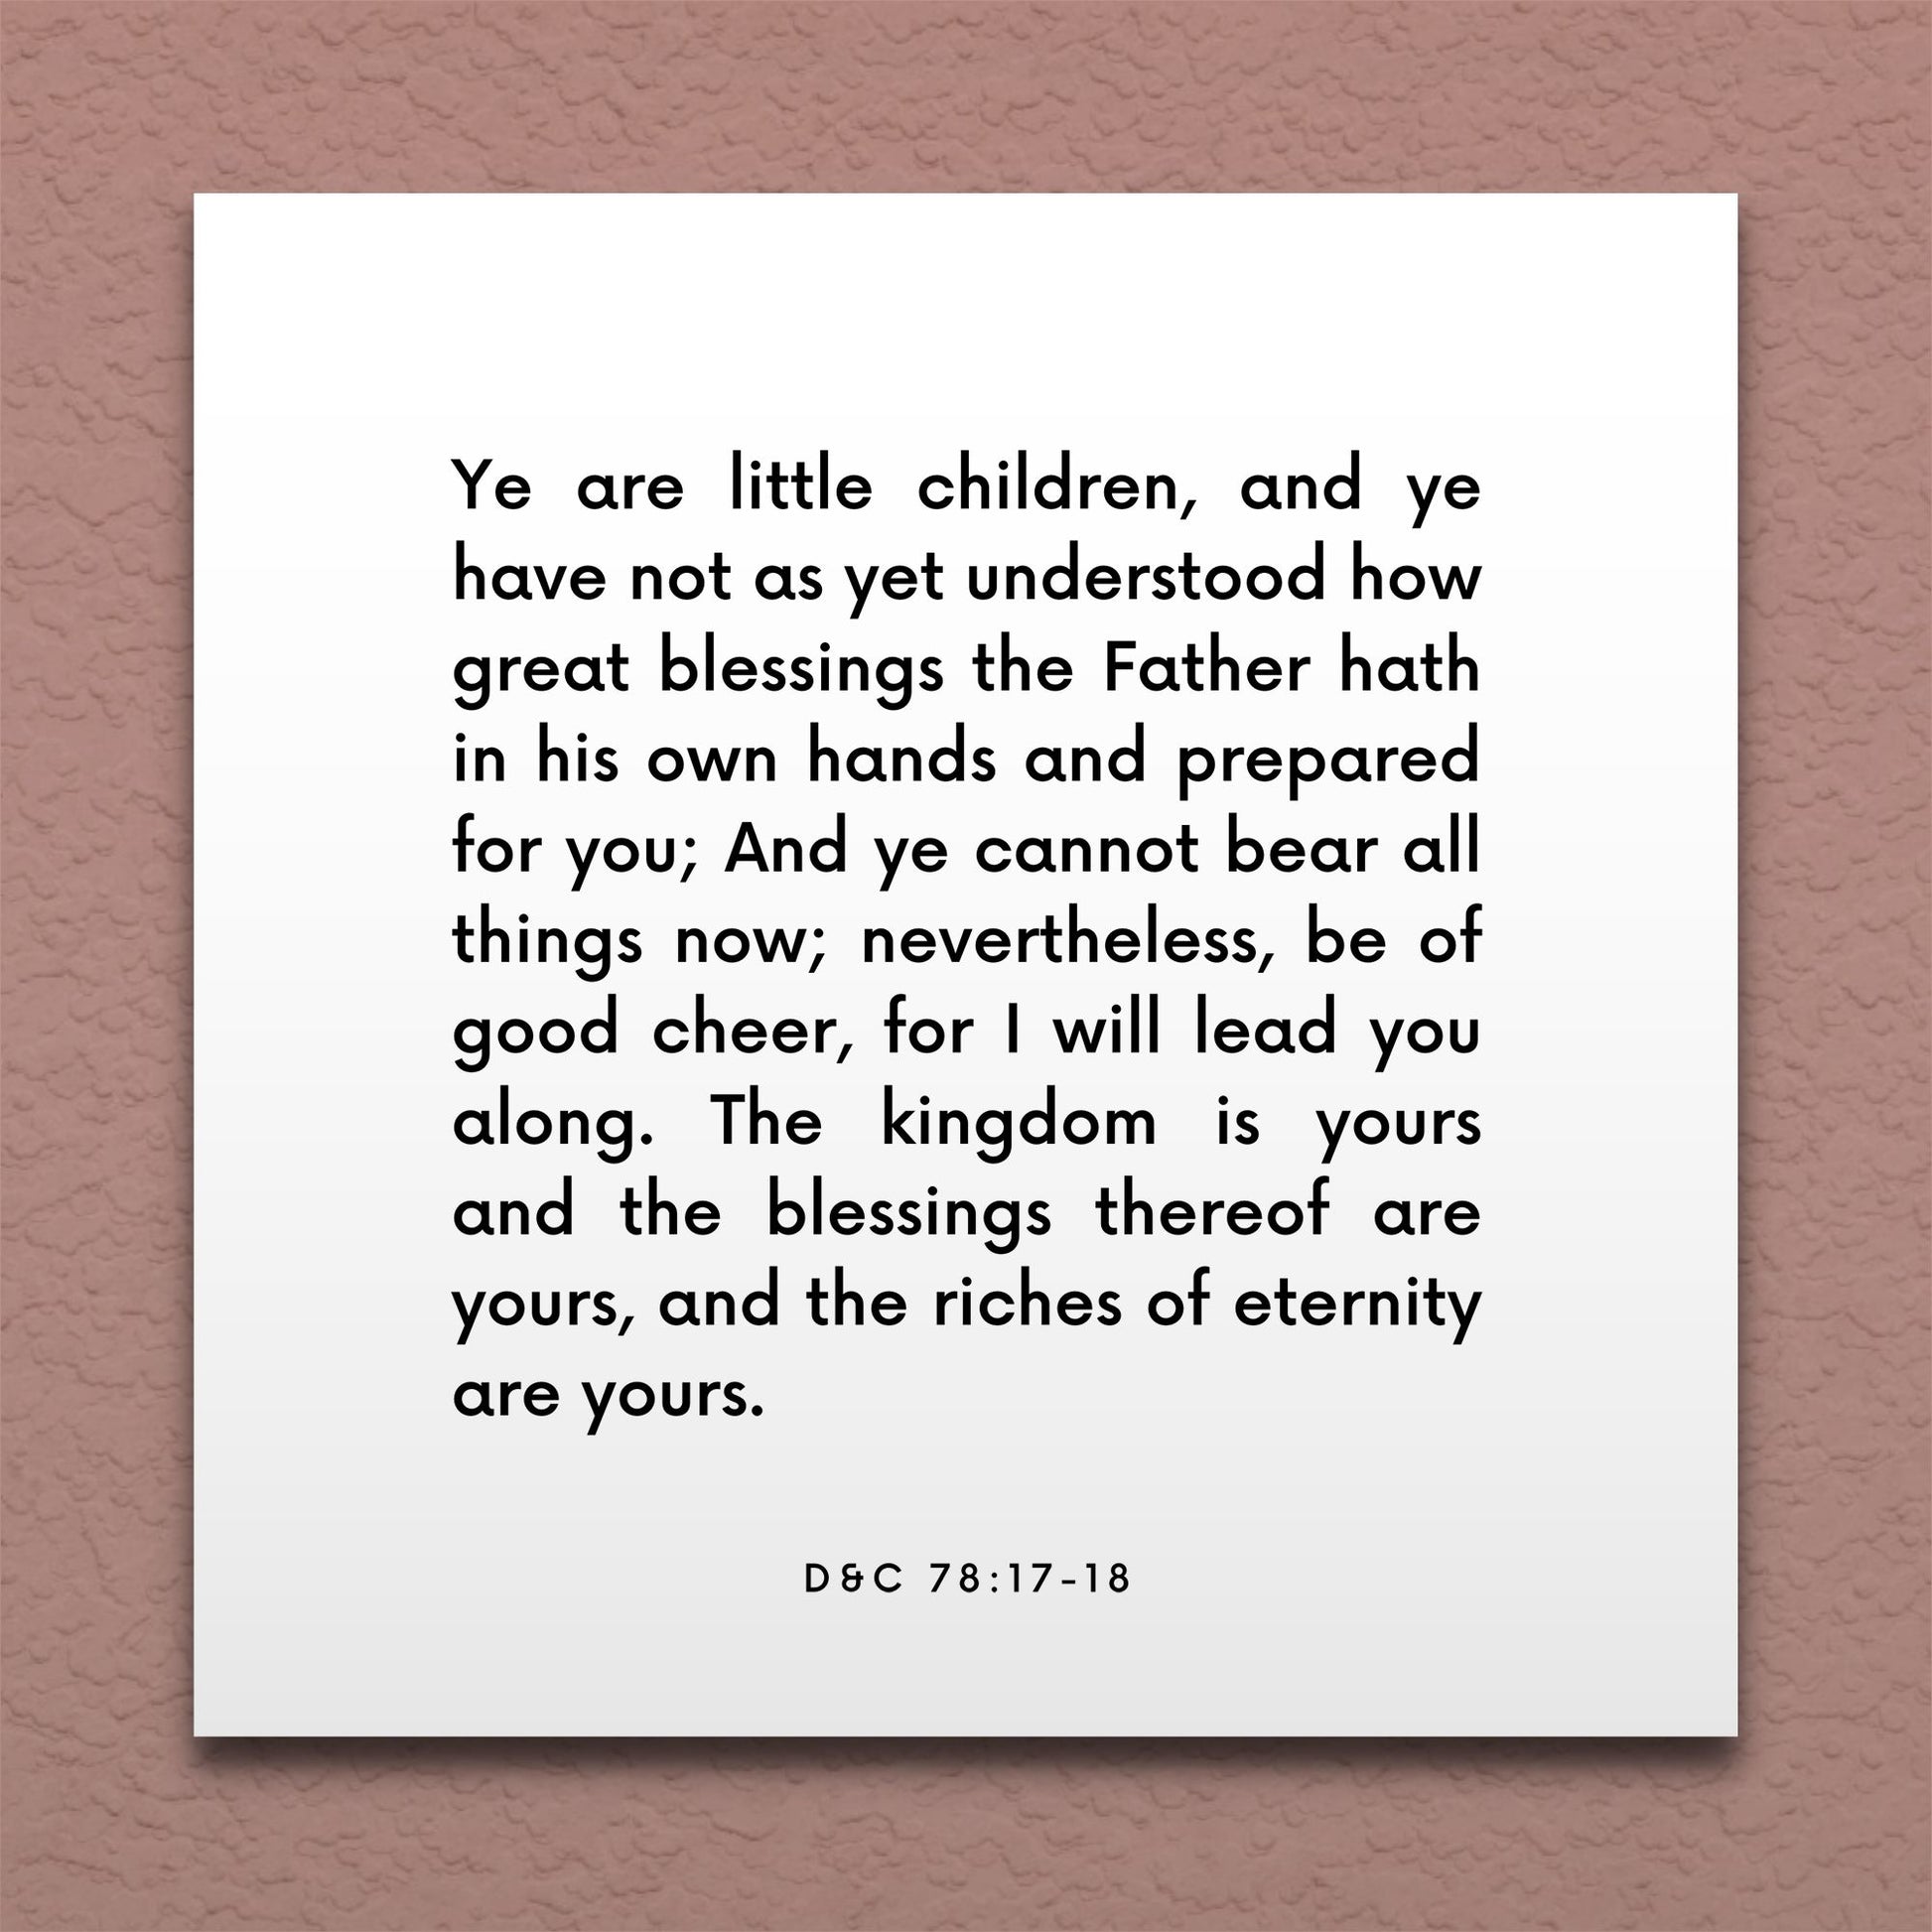 Wall-mounted scripture tile for D&C 78:17-18 - "Be of good cheer, for I will lead you along"